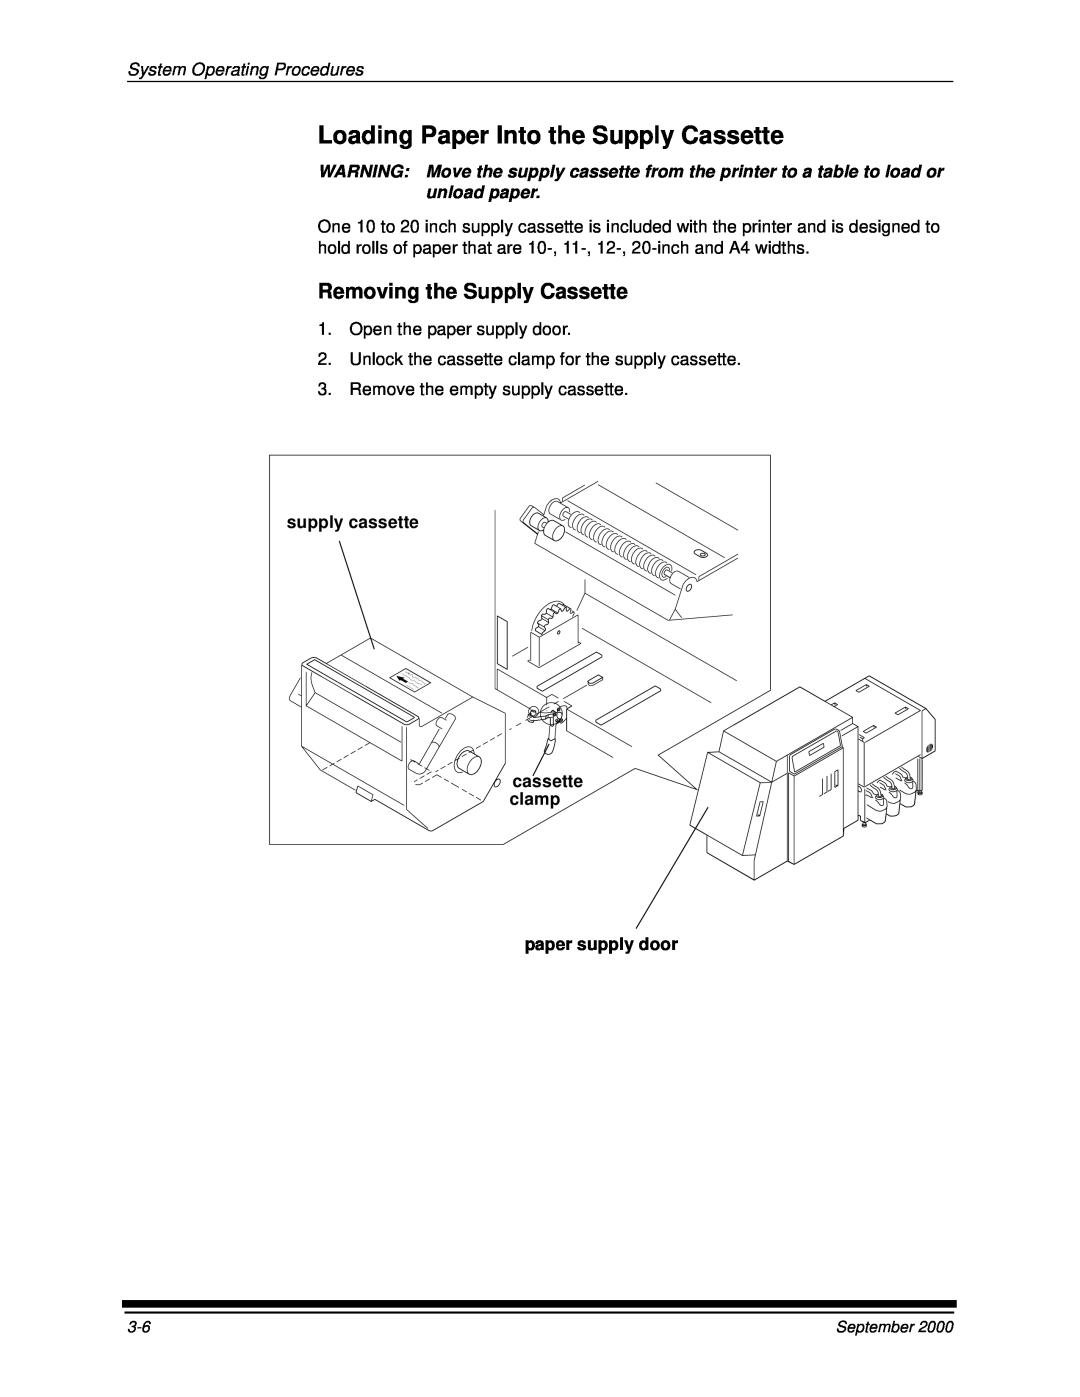 Kodak 20P manual Loading Paper Into the Supply Cassette, Removing the Supply Cassette, System Operating Procedures 